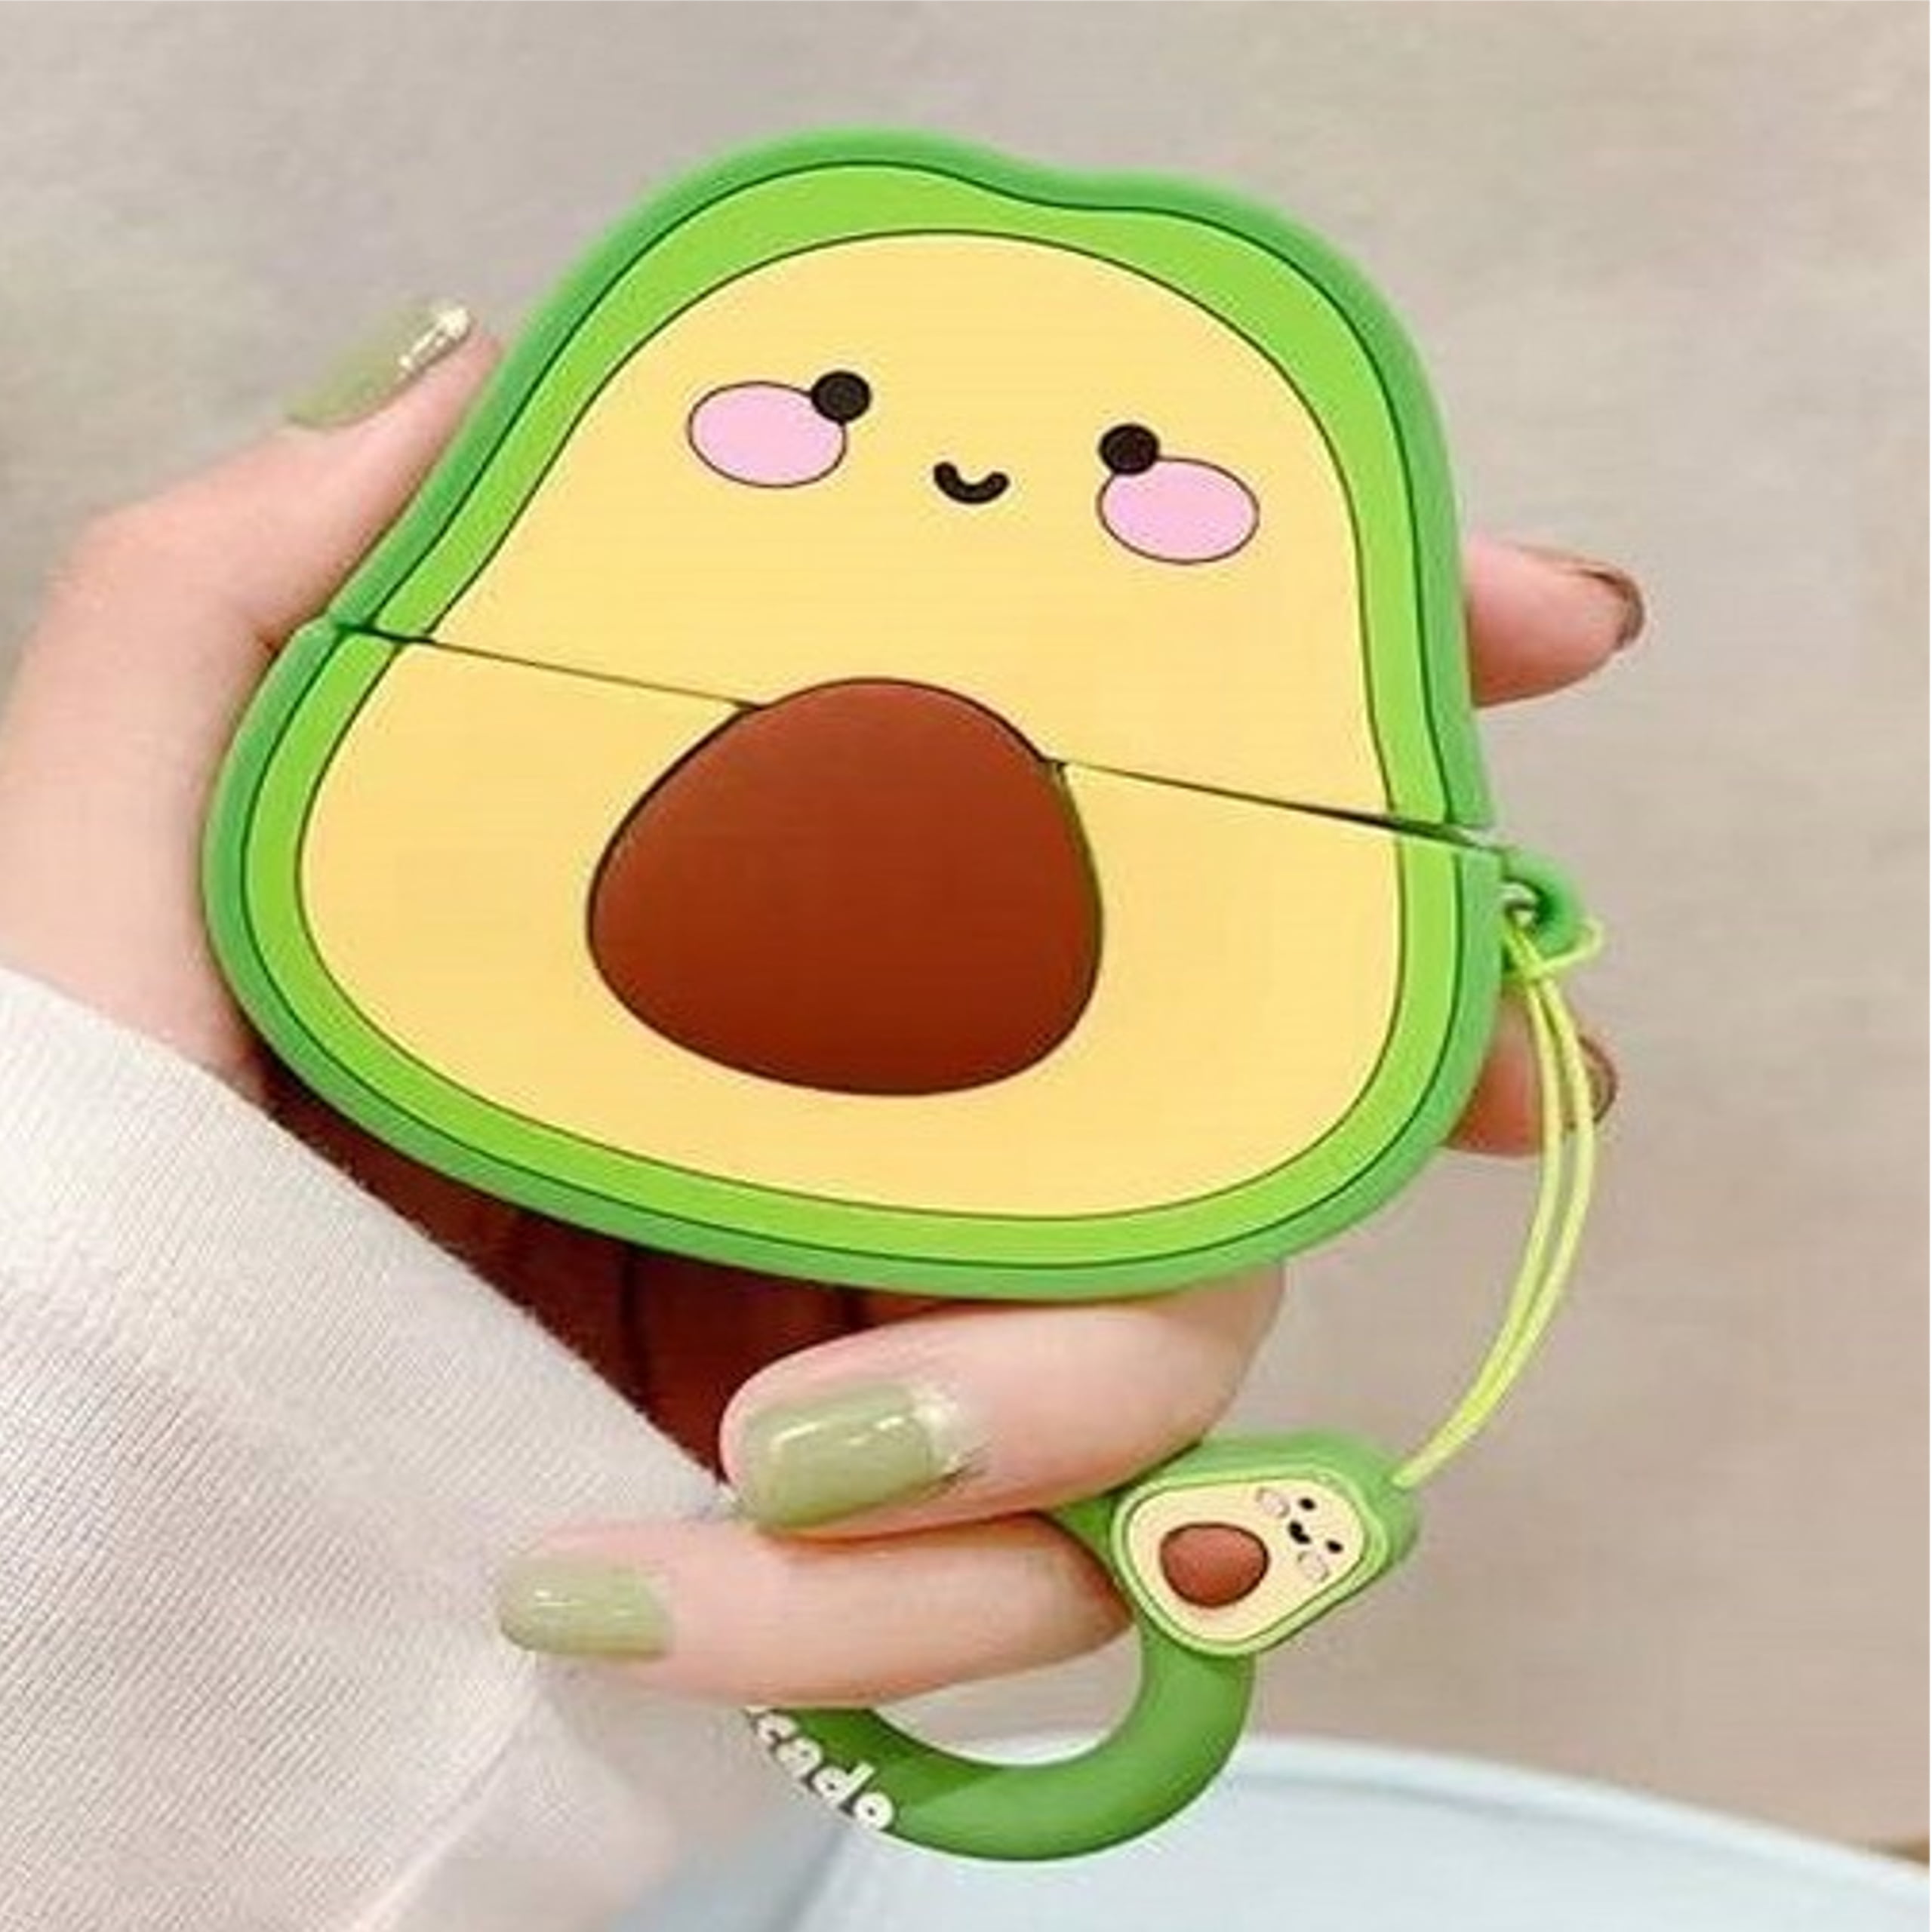 Cute Airpods Case, Airpods 2 Case, Funny 3d Cartoon Fruit Avocado Case,  Soft Silicone Full Protection Shockproof Charging Case Cover With Keychain